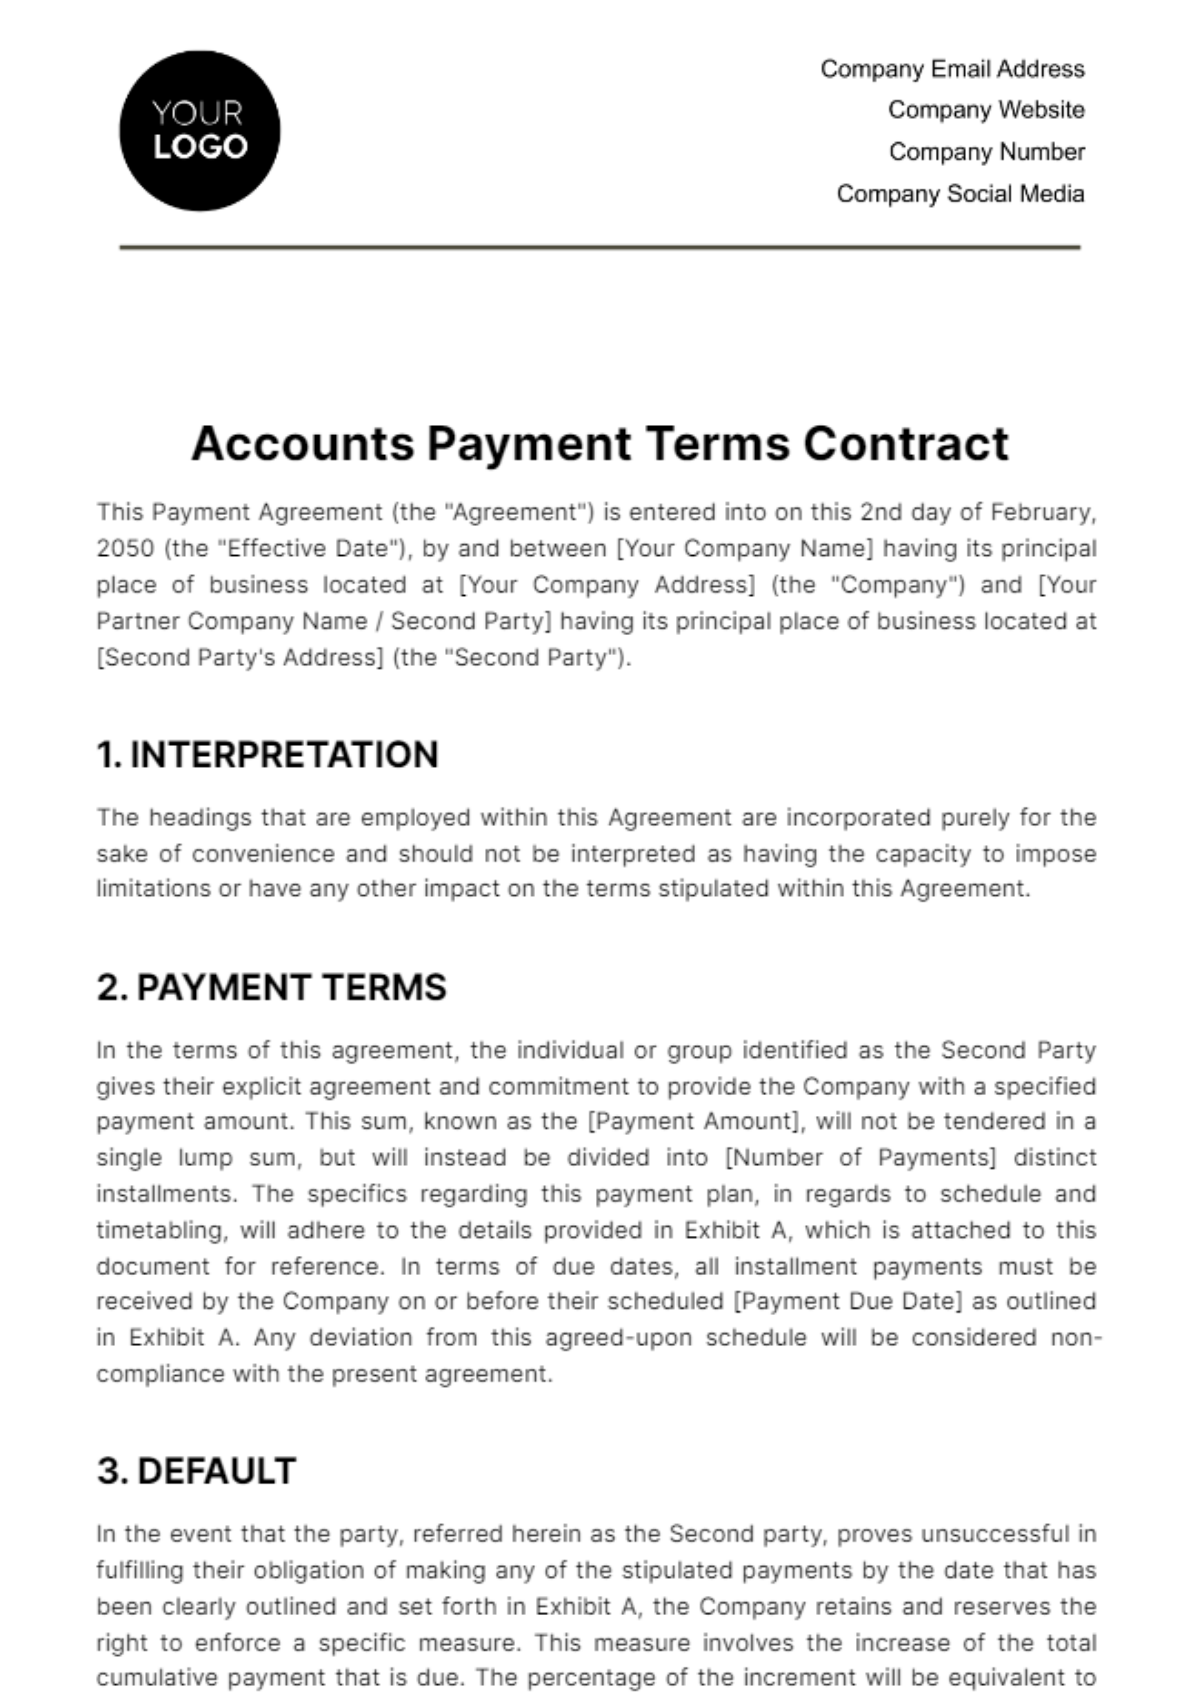 Accounts Payment Terms Contract Template